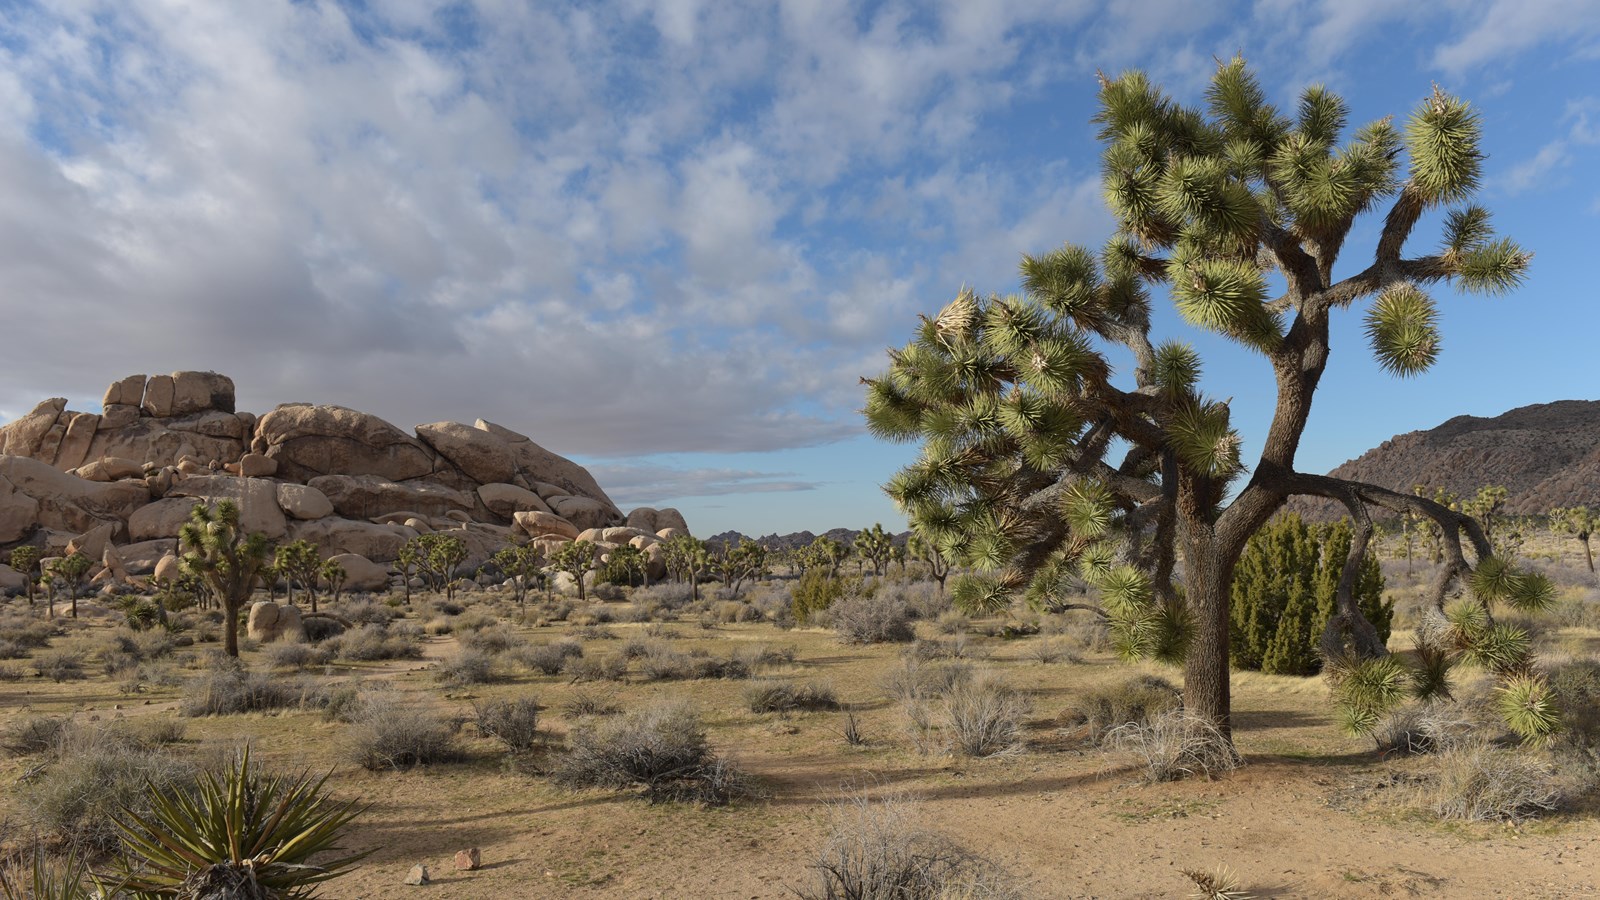 A large rock formation surrounded by Joshua trees and shrubs under light clouds.